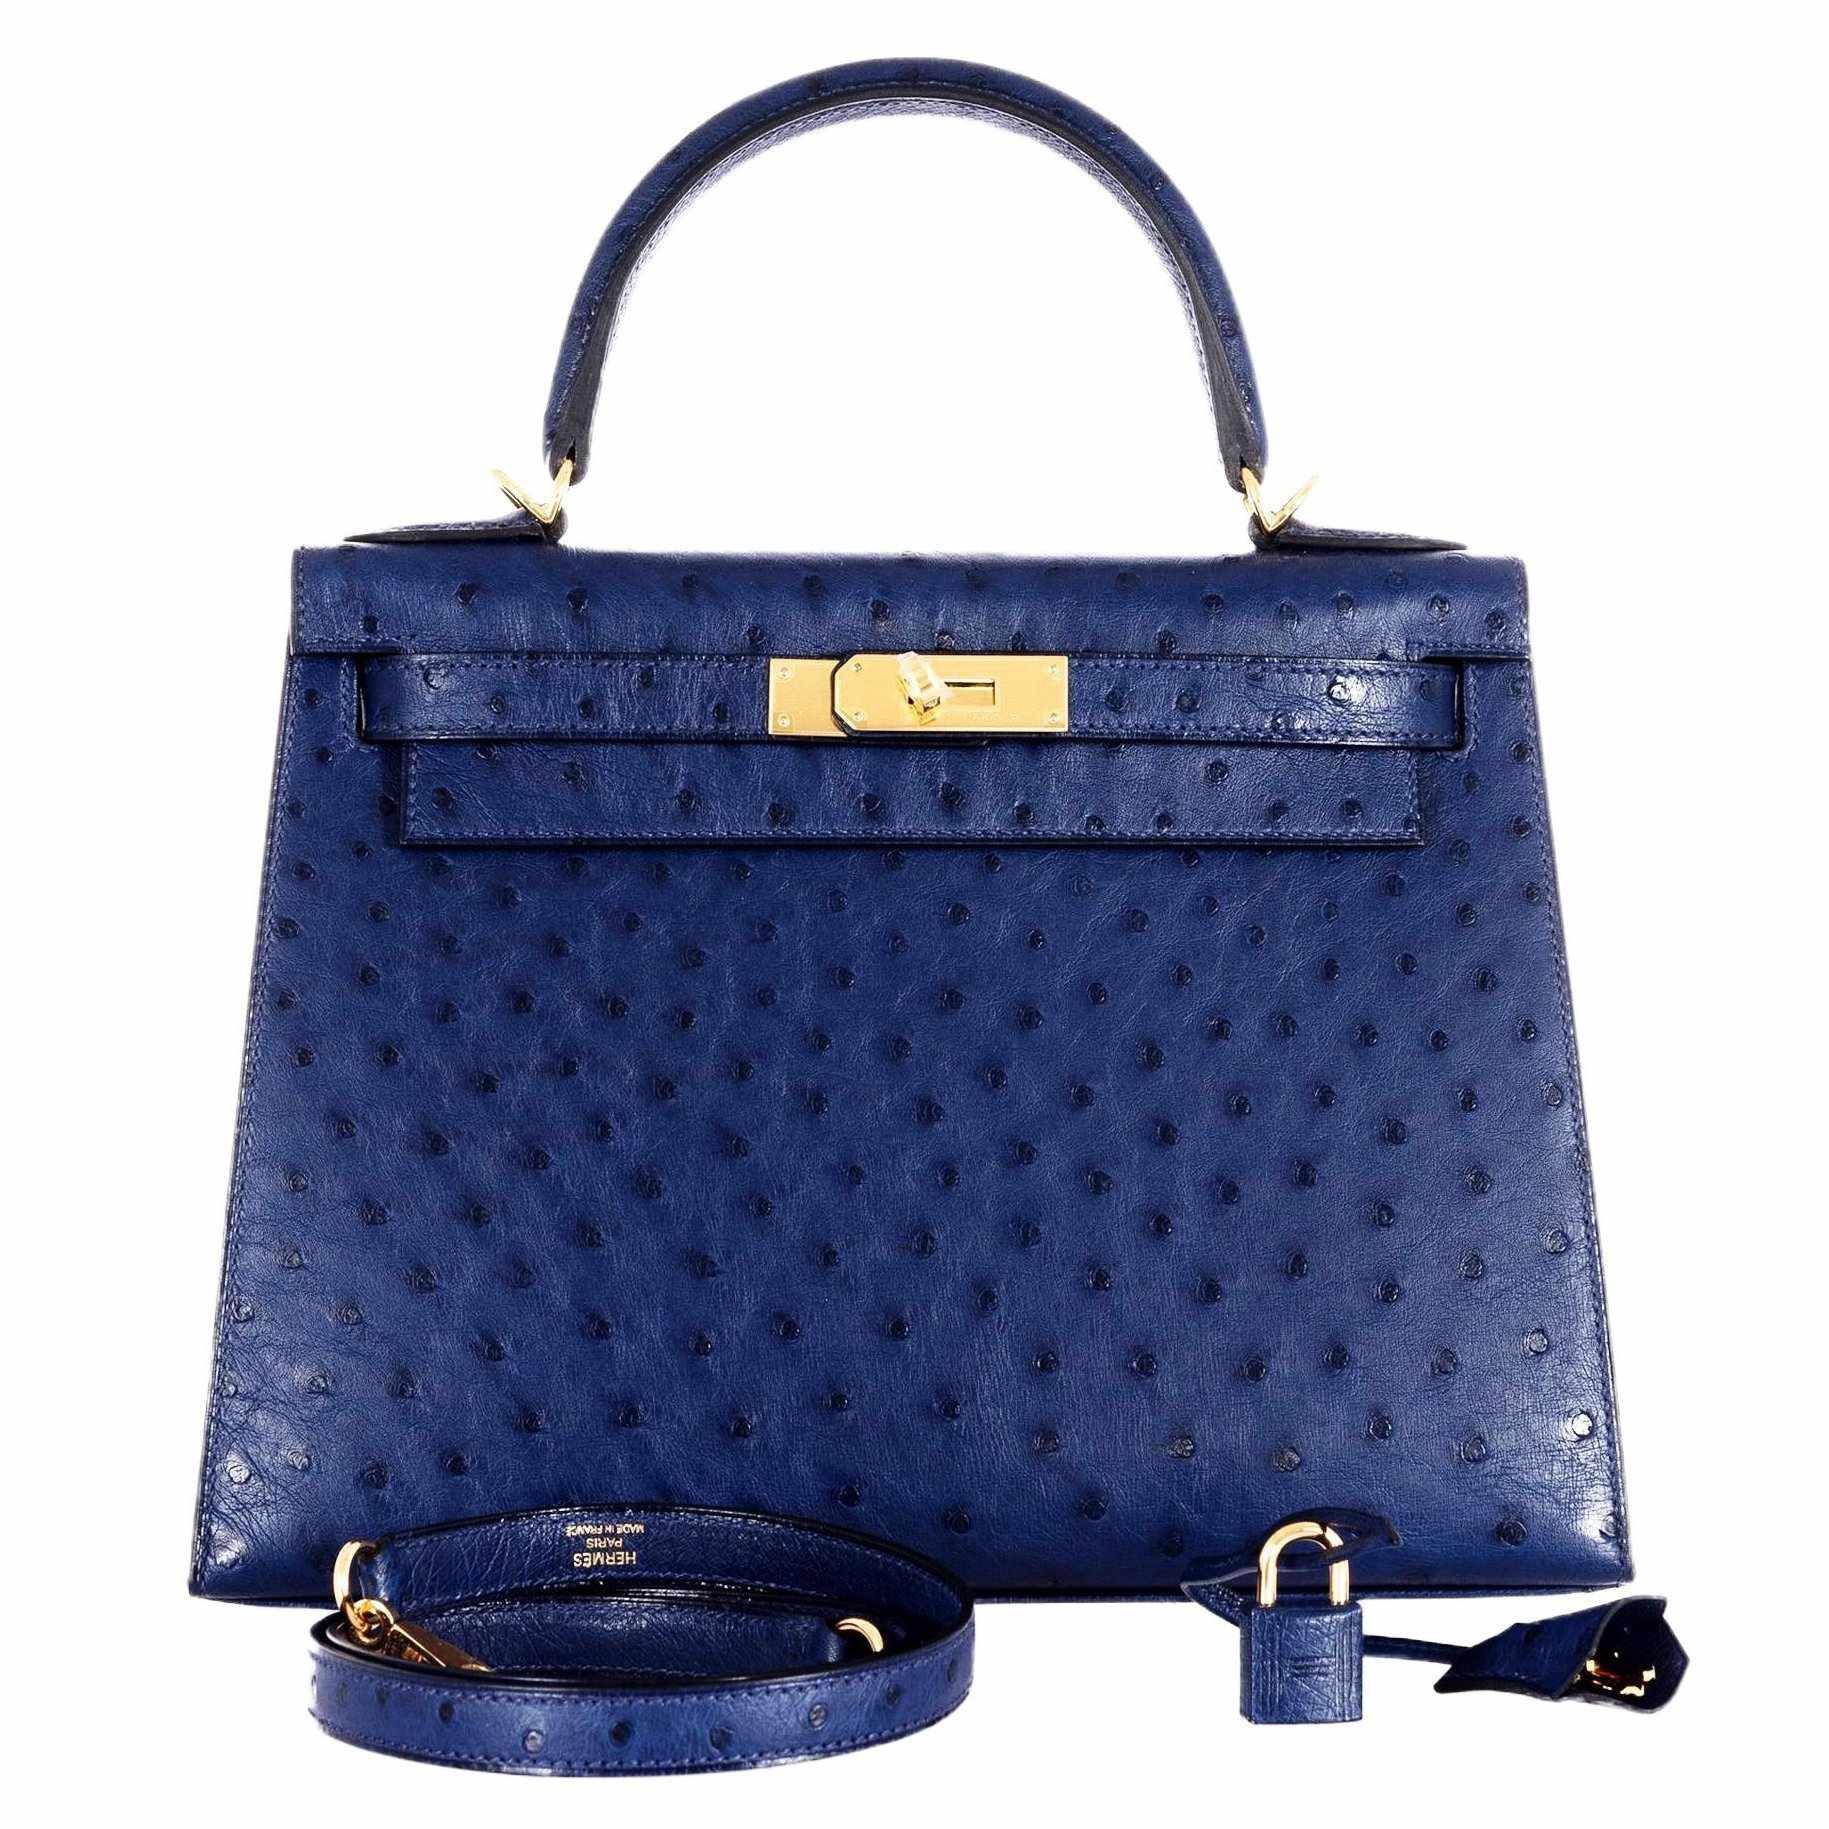 A DEEP BLUE OSTRICH SELLIER KELLY 28 WITH GOLD HARDWARE